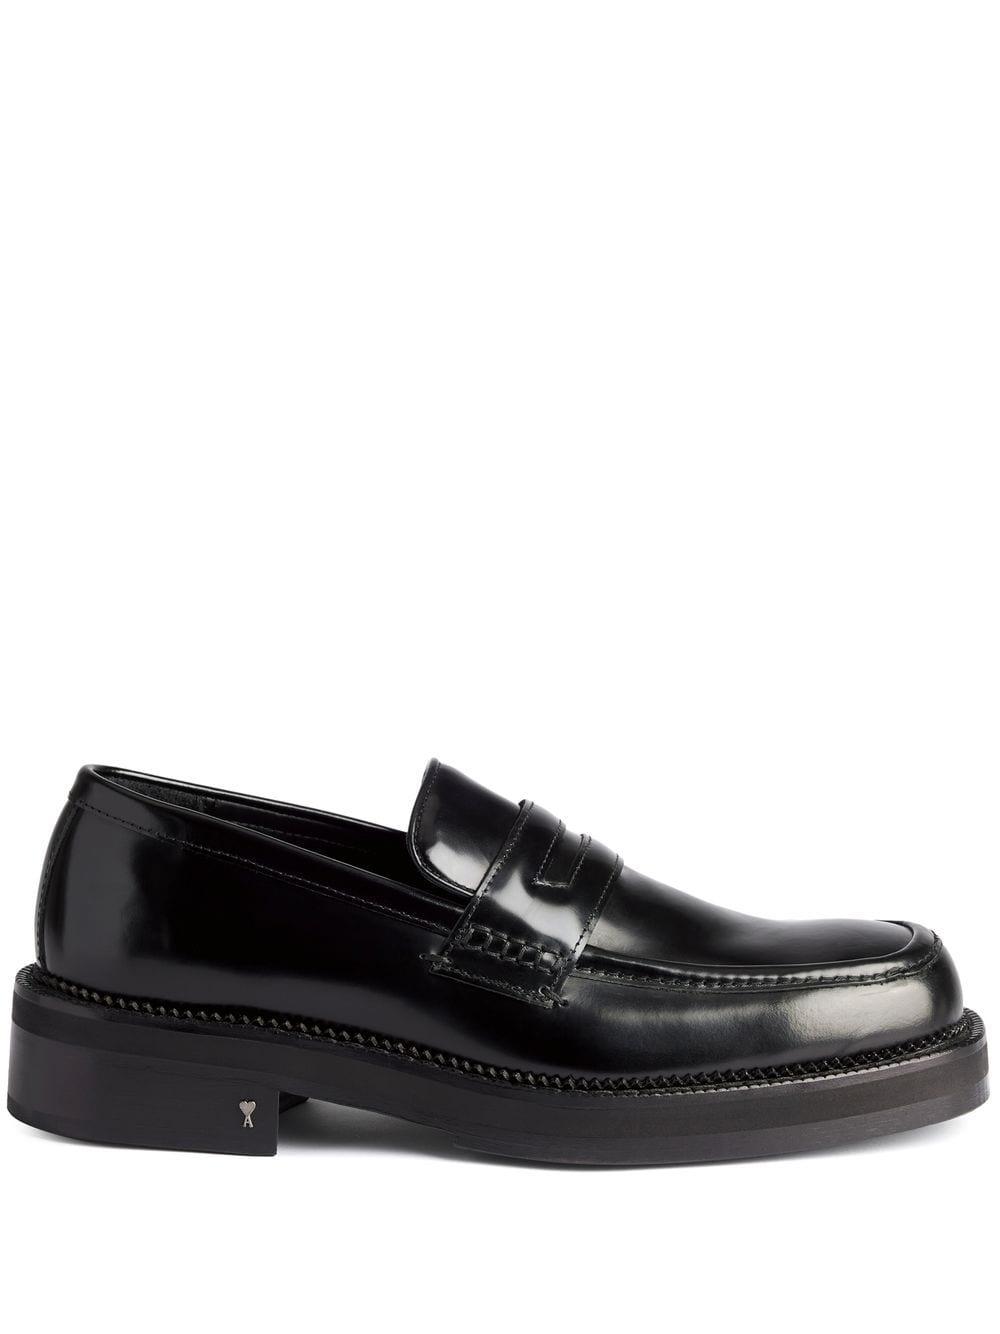 Ami Paris Square-toe Polished Loafers in Black | Lyst